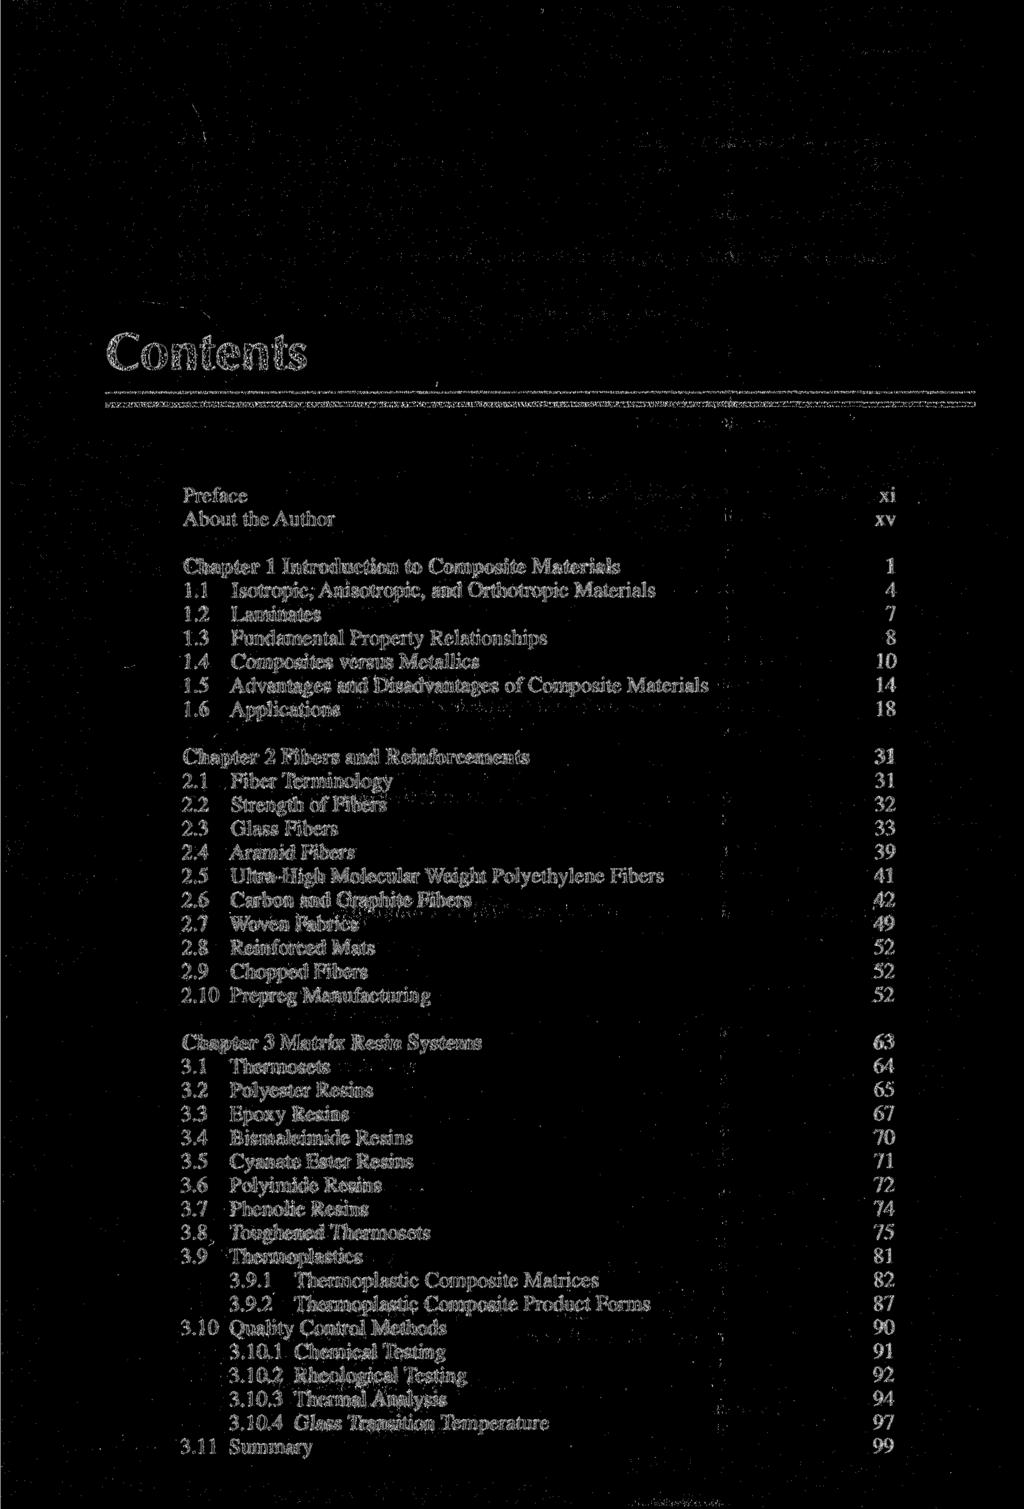 Contents Preface About the Author xi xv Chapter 1 Introduction to Composite Materials 1 1.1 Isotropic, Anisotropic, and Orthotropic Materials 4 1.2 Laminates 7 1.